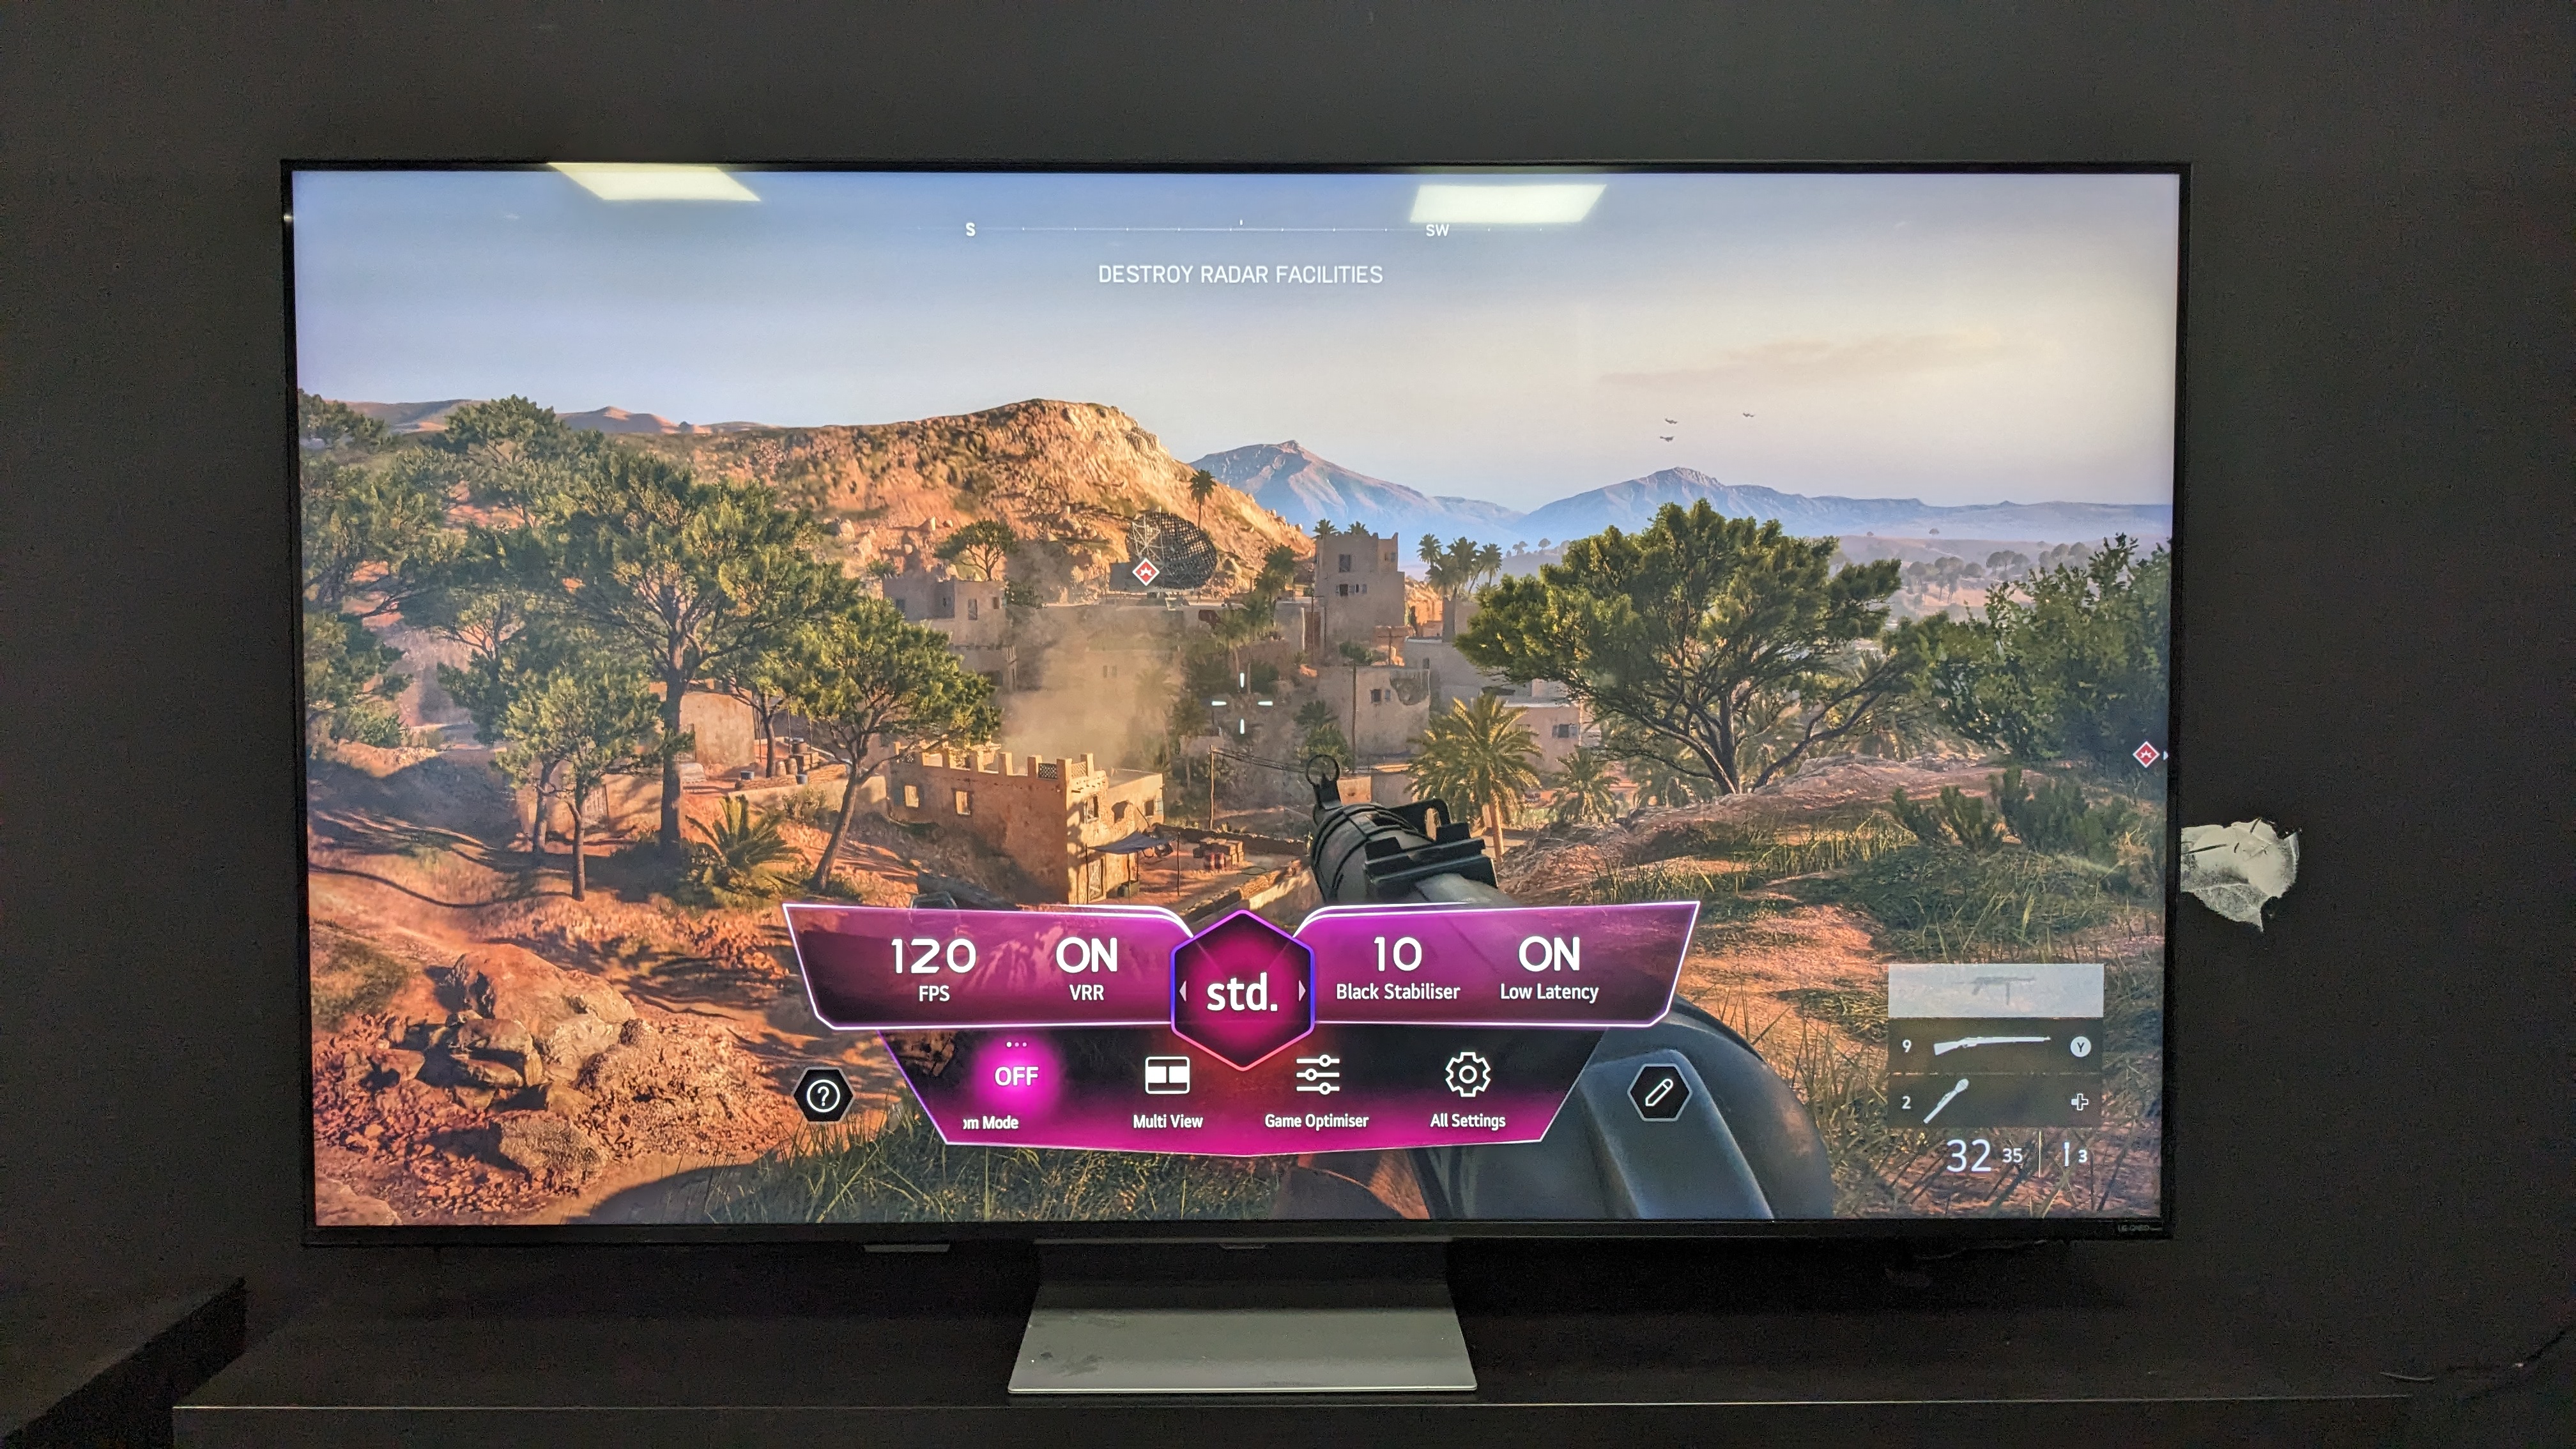 LG QNED91T with Battlefield V on screen